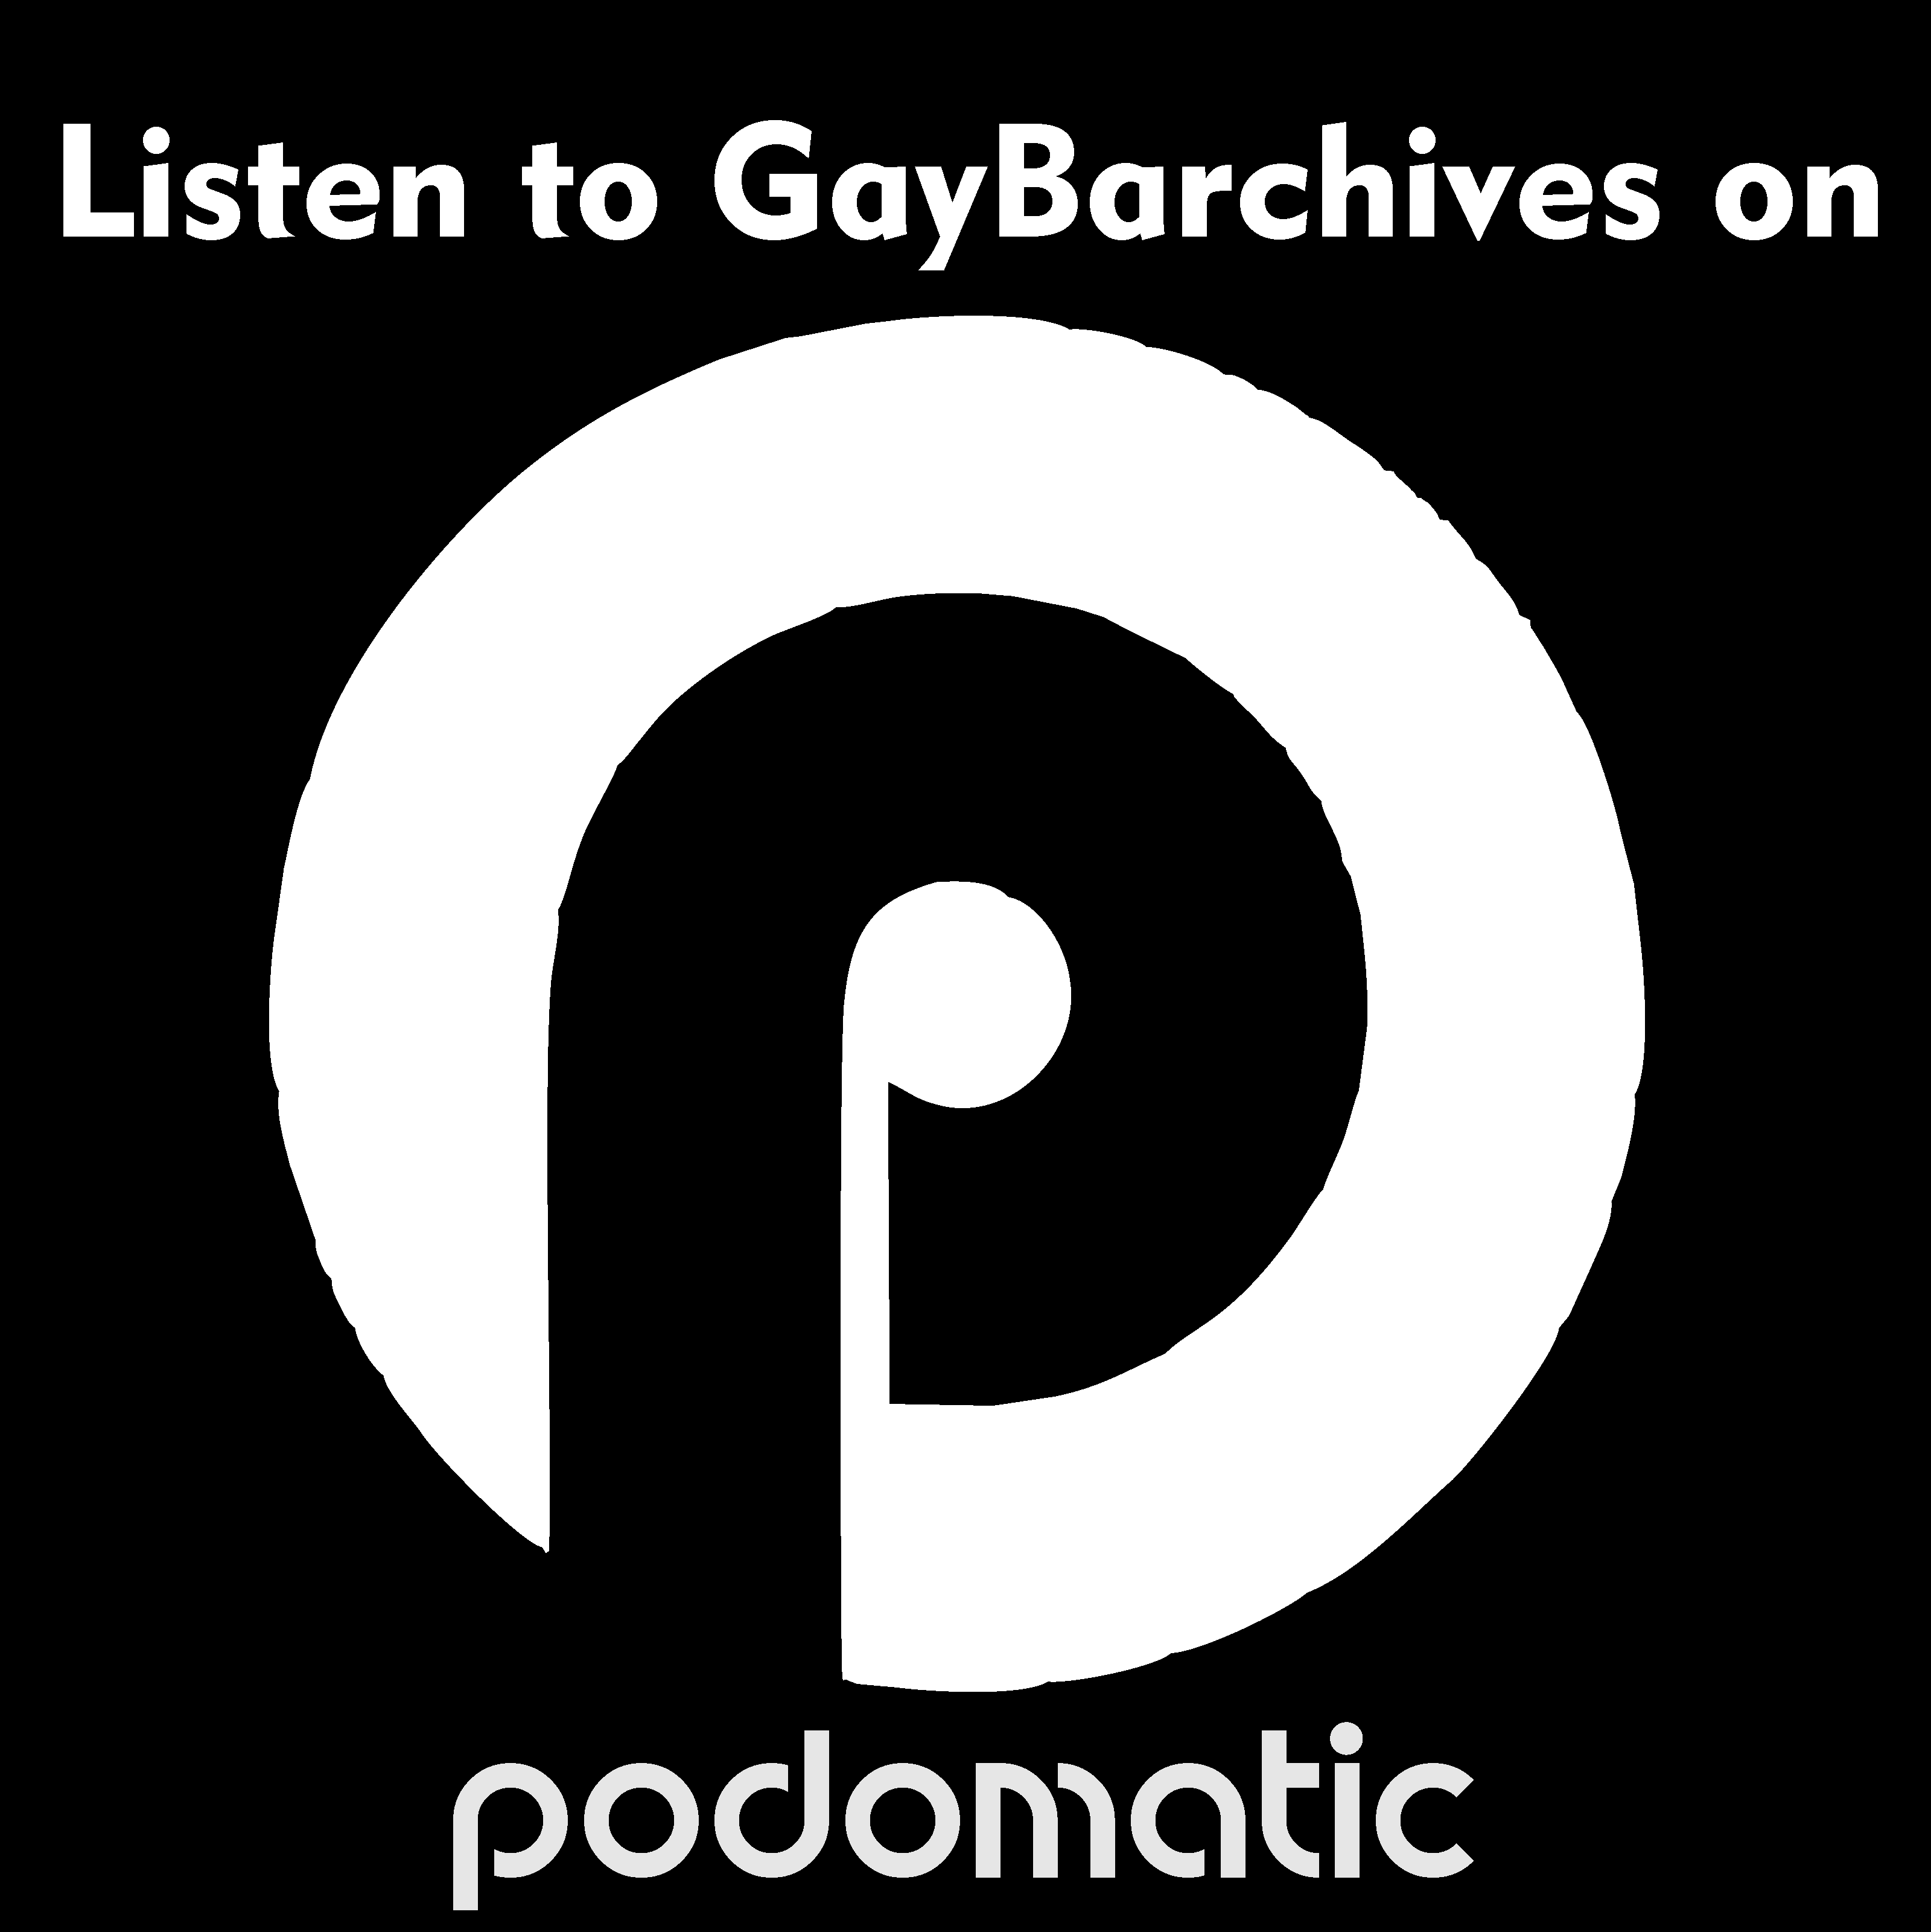 Listen to the gay barchives podcast on podomatic #ilovegaybars